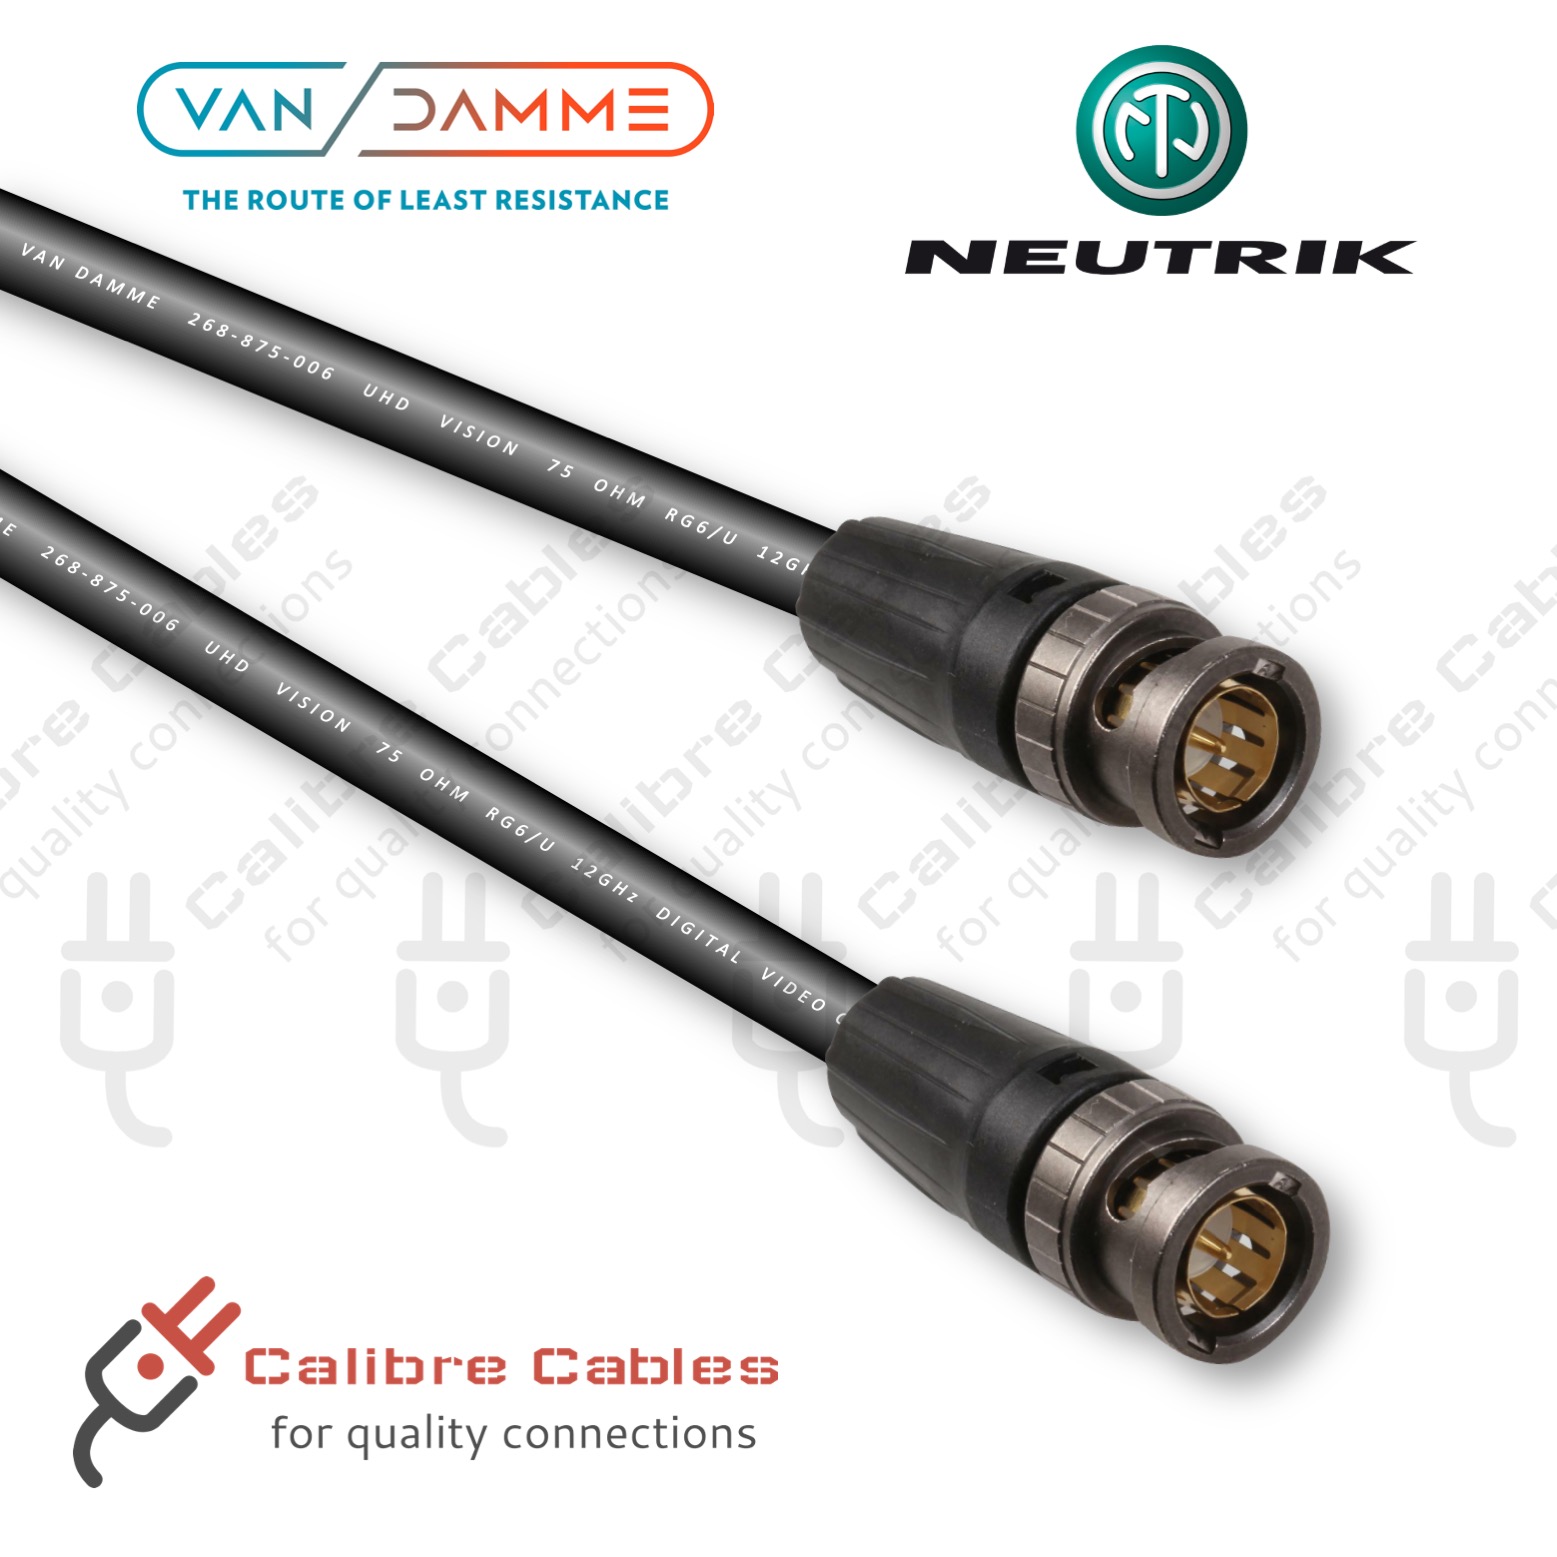 Alvins Cables 12G HD SDI Video Coaxial Cable Neutrik BNC Male to Male for 4K Video Camera 1M 